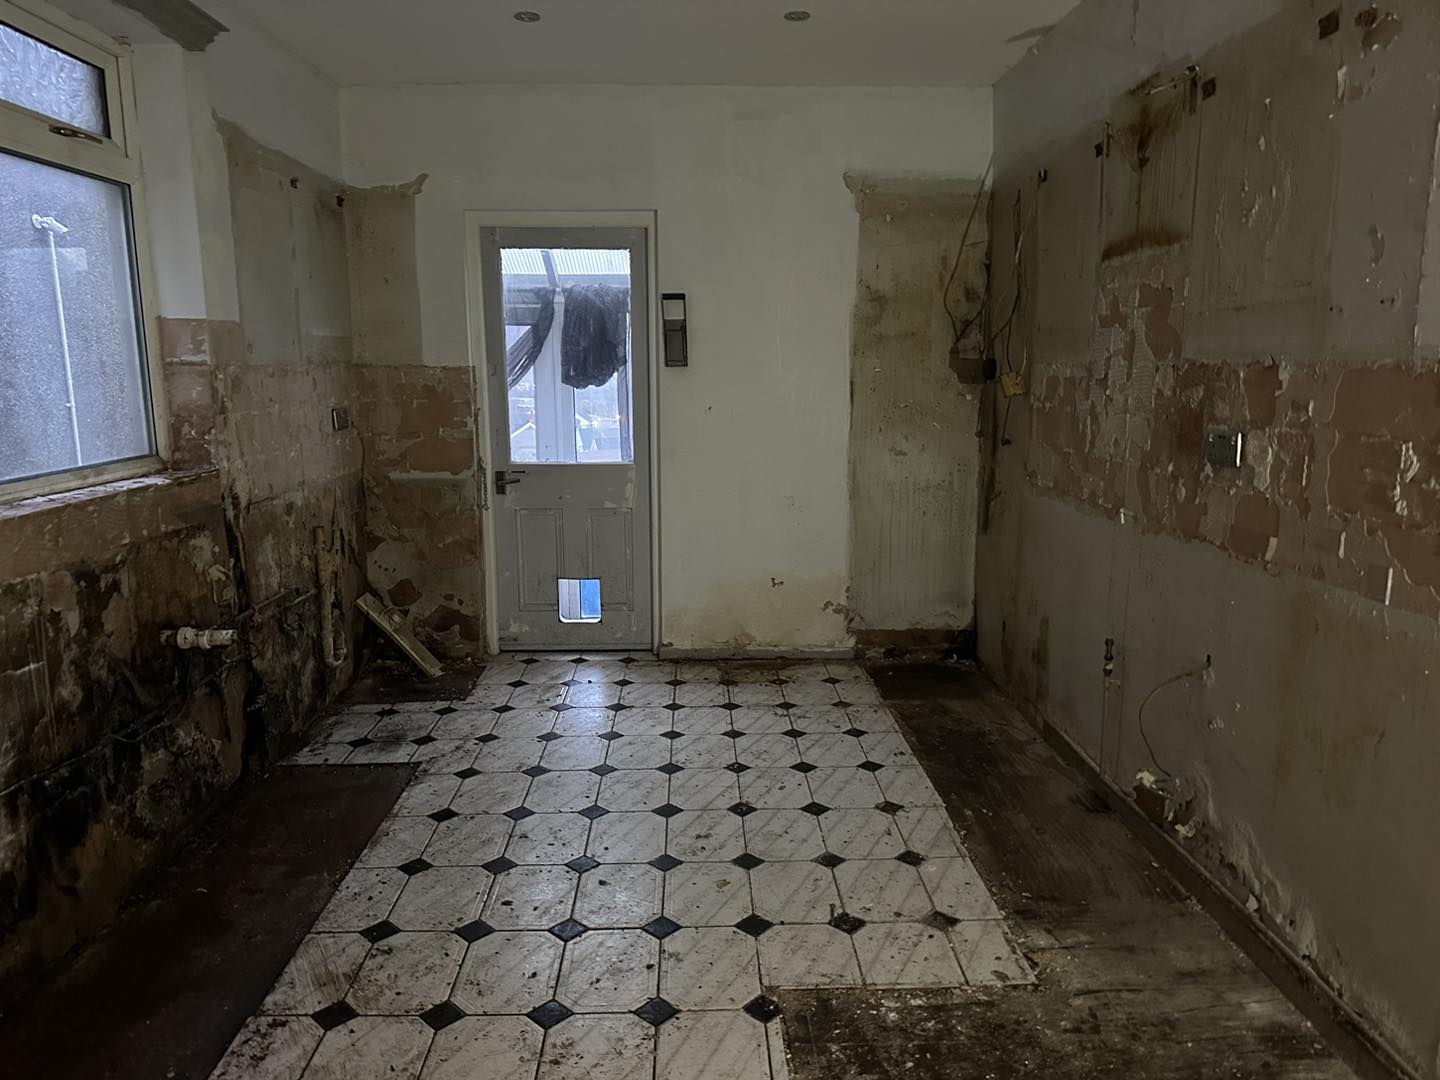 Photo of a kitchen that has been stripped out